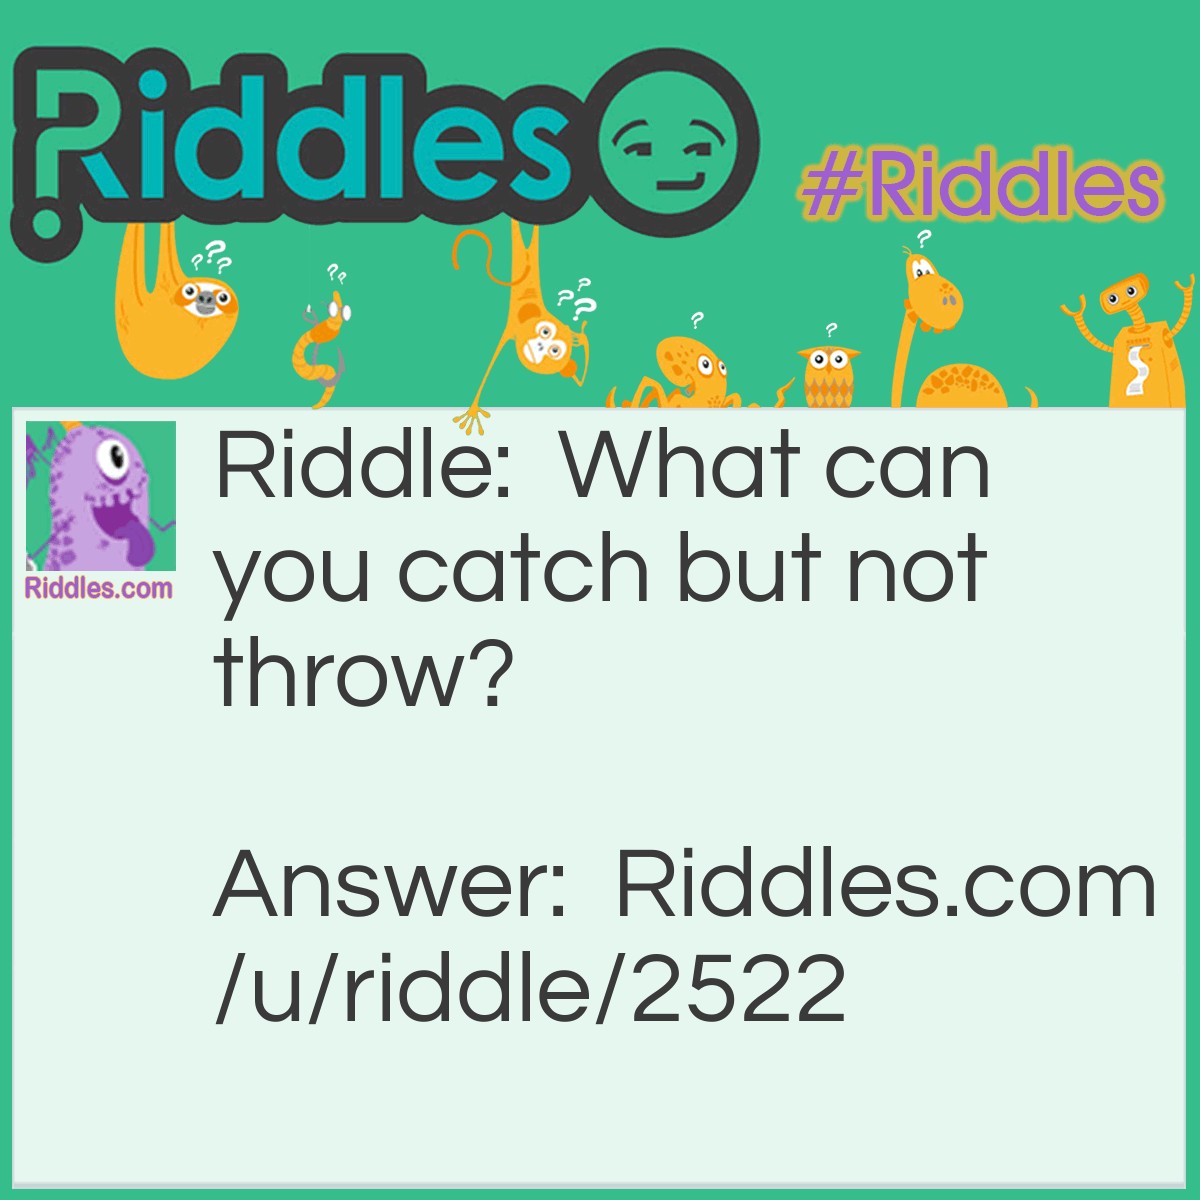 Riddle: What can you catch but not throw? Answer: A cold.